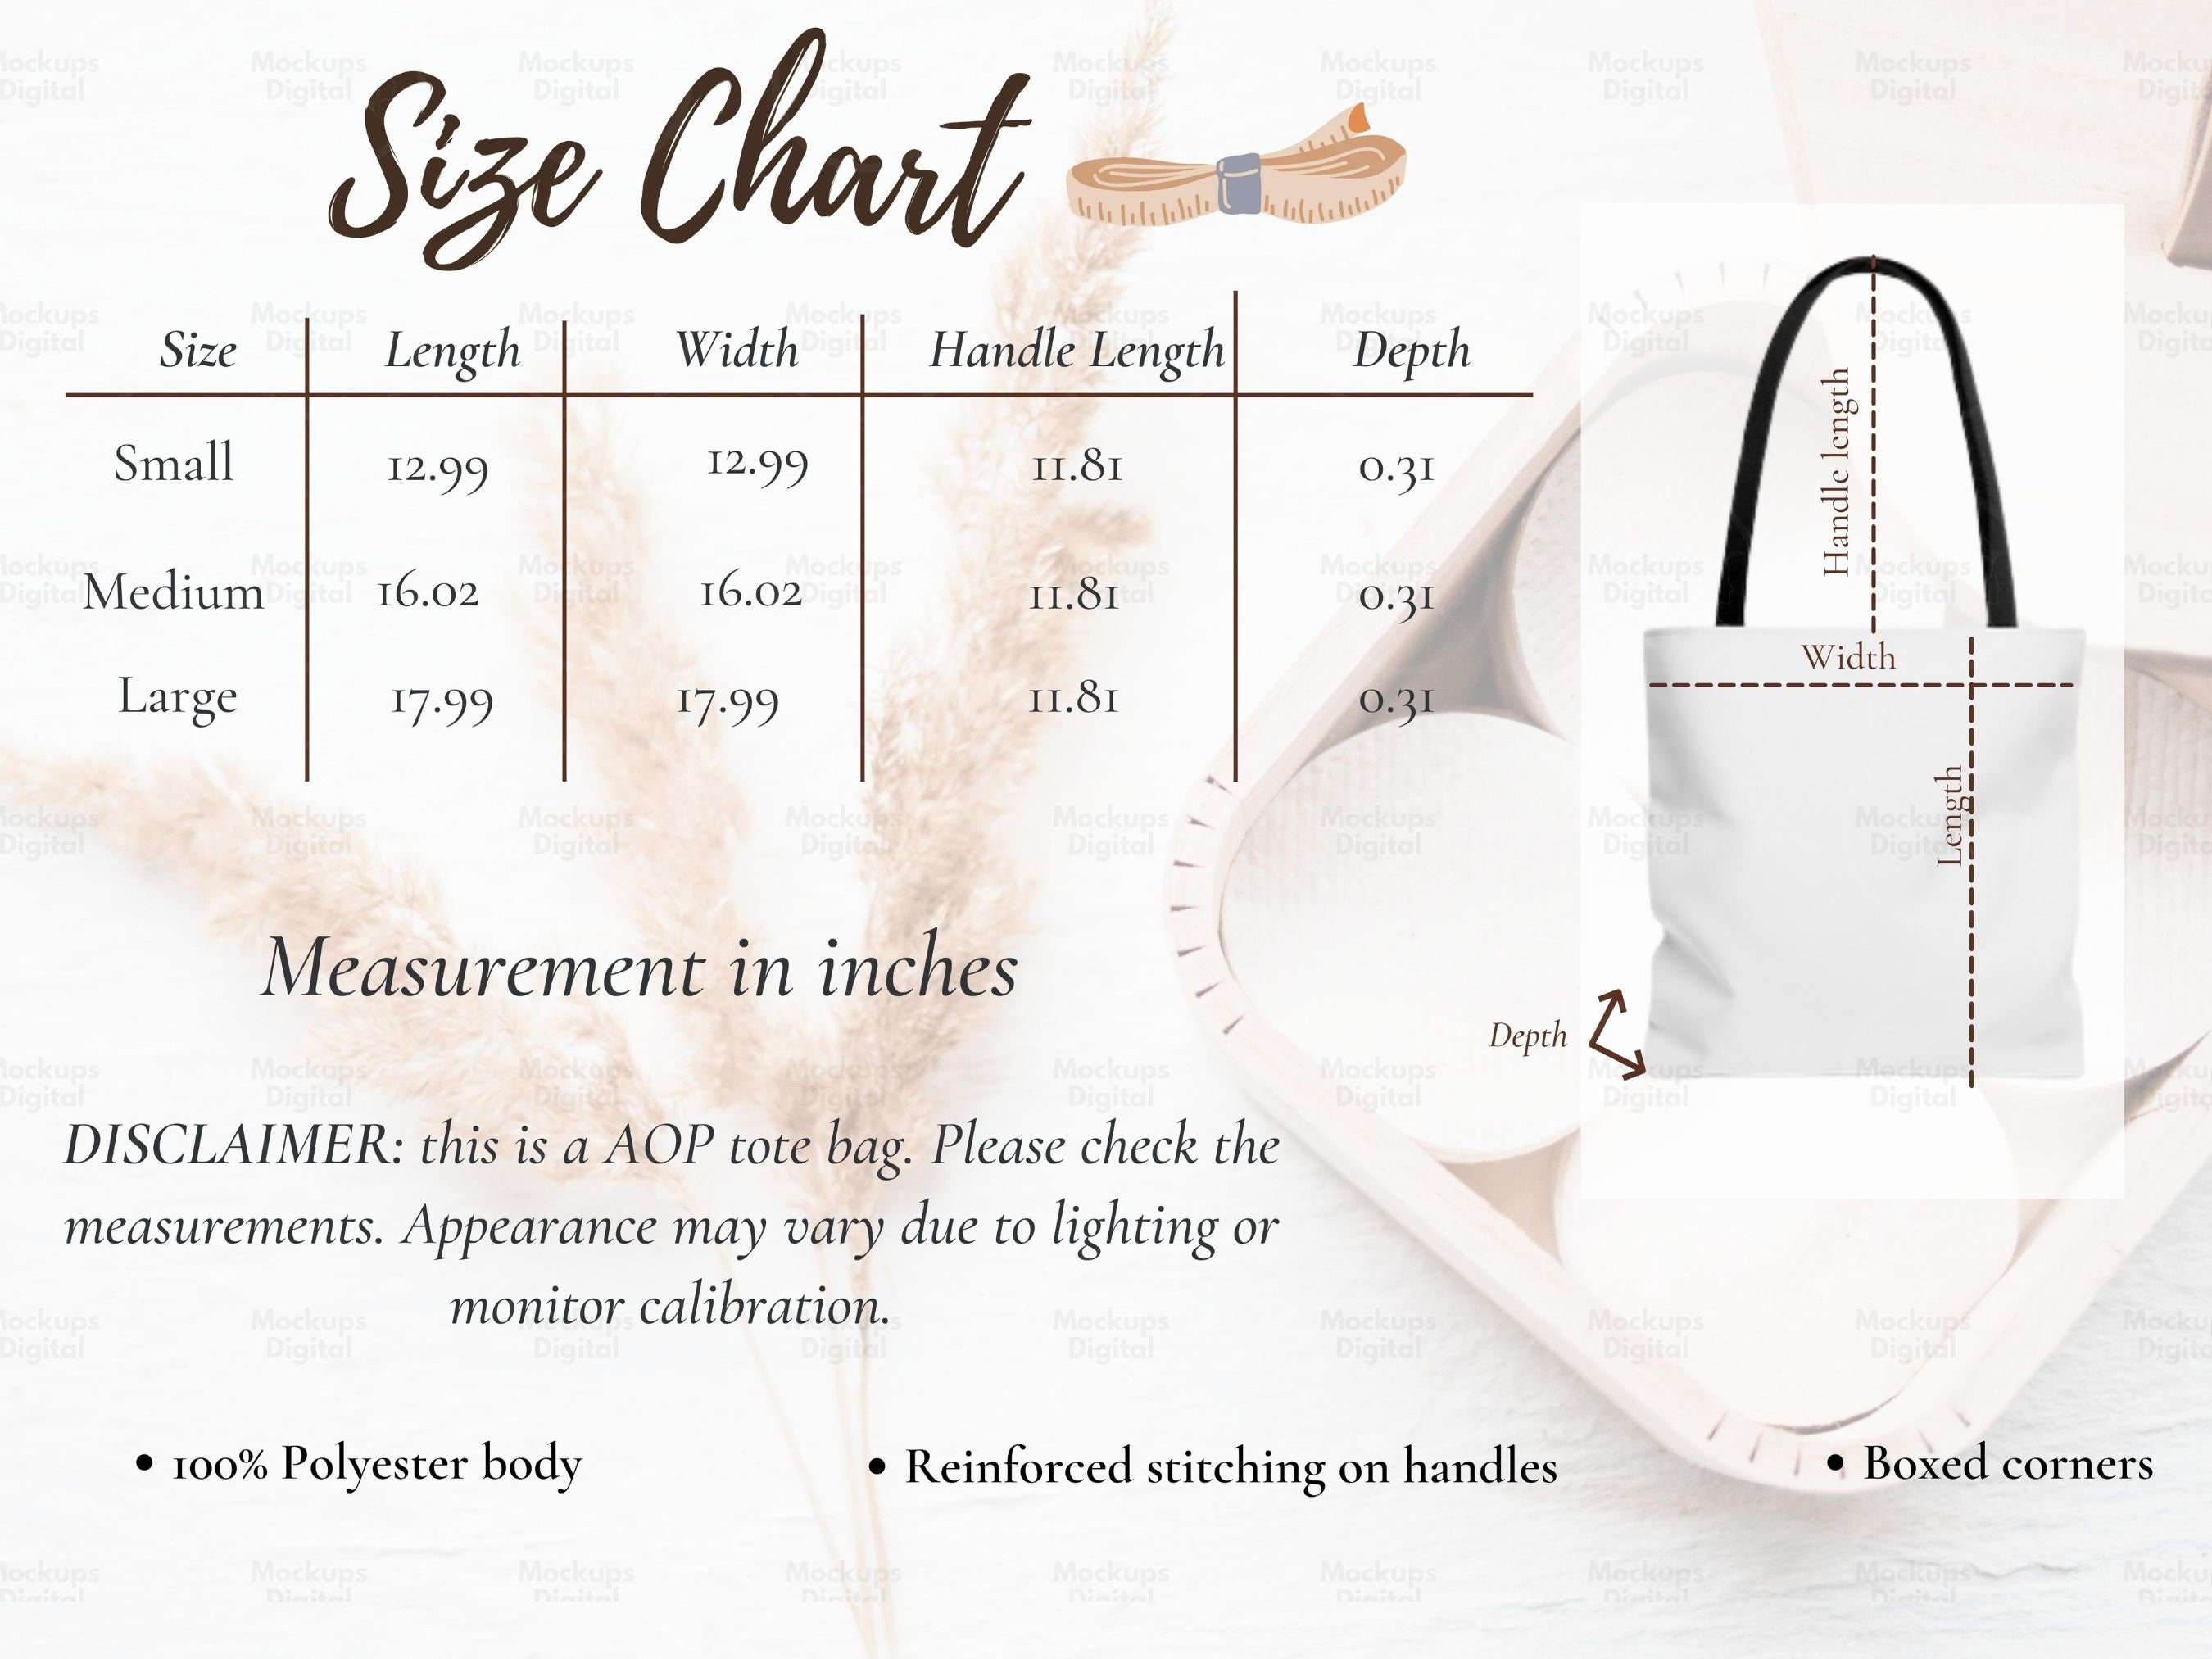 Tote bag size chart, size chart for tote bag, tote bag mockup and size  chart, neutral background tote bag size guide, tote bag